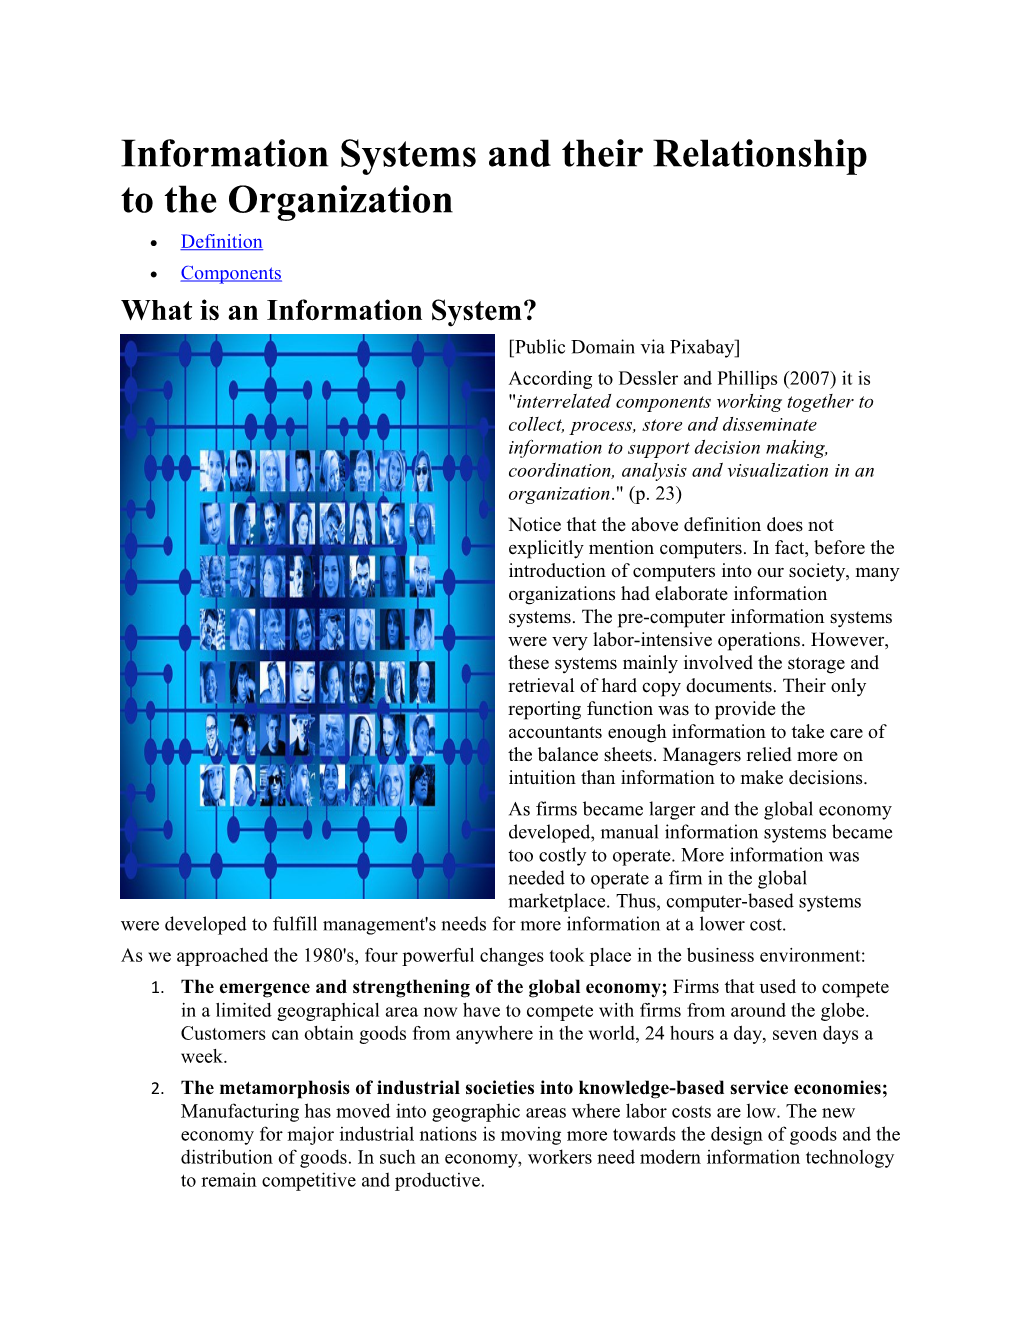 Information Systems and Their Relationship to the Organization